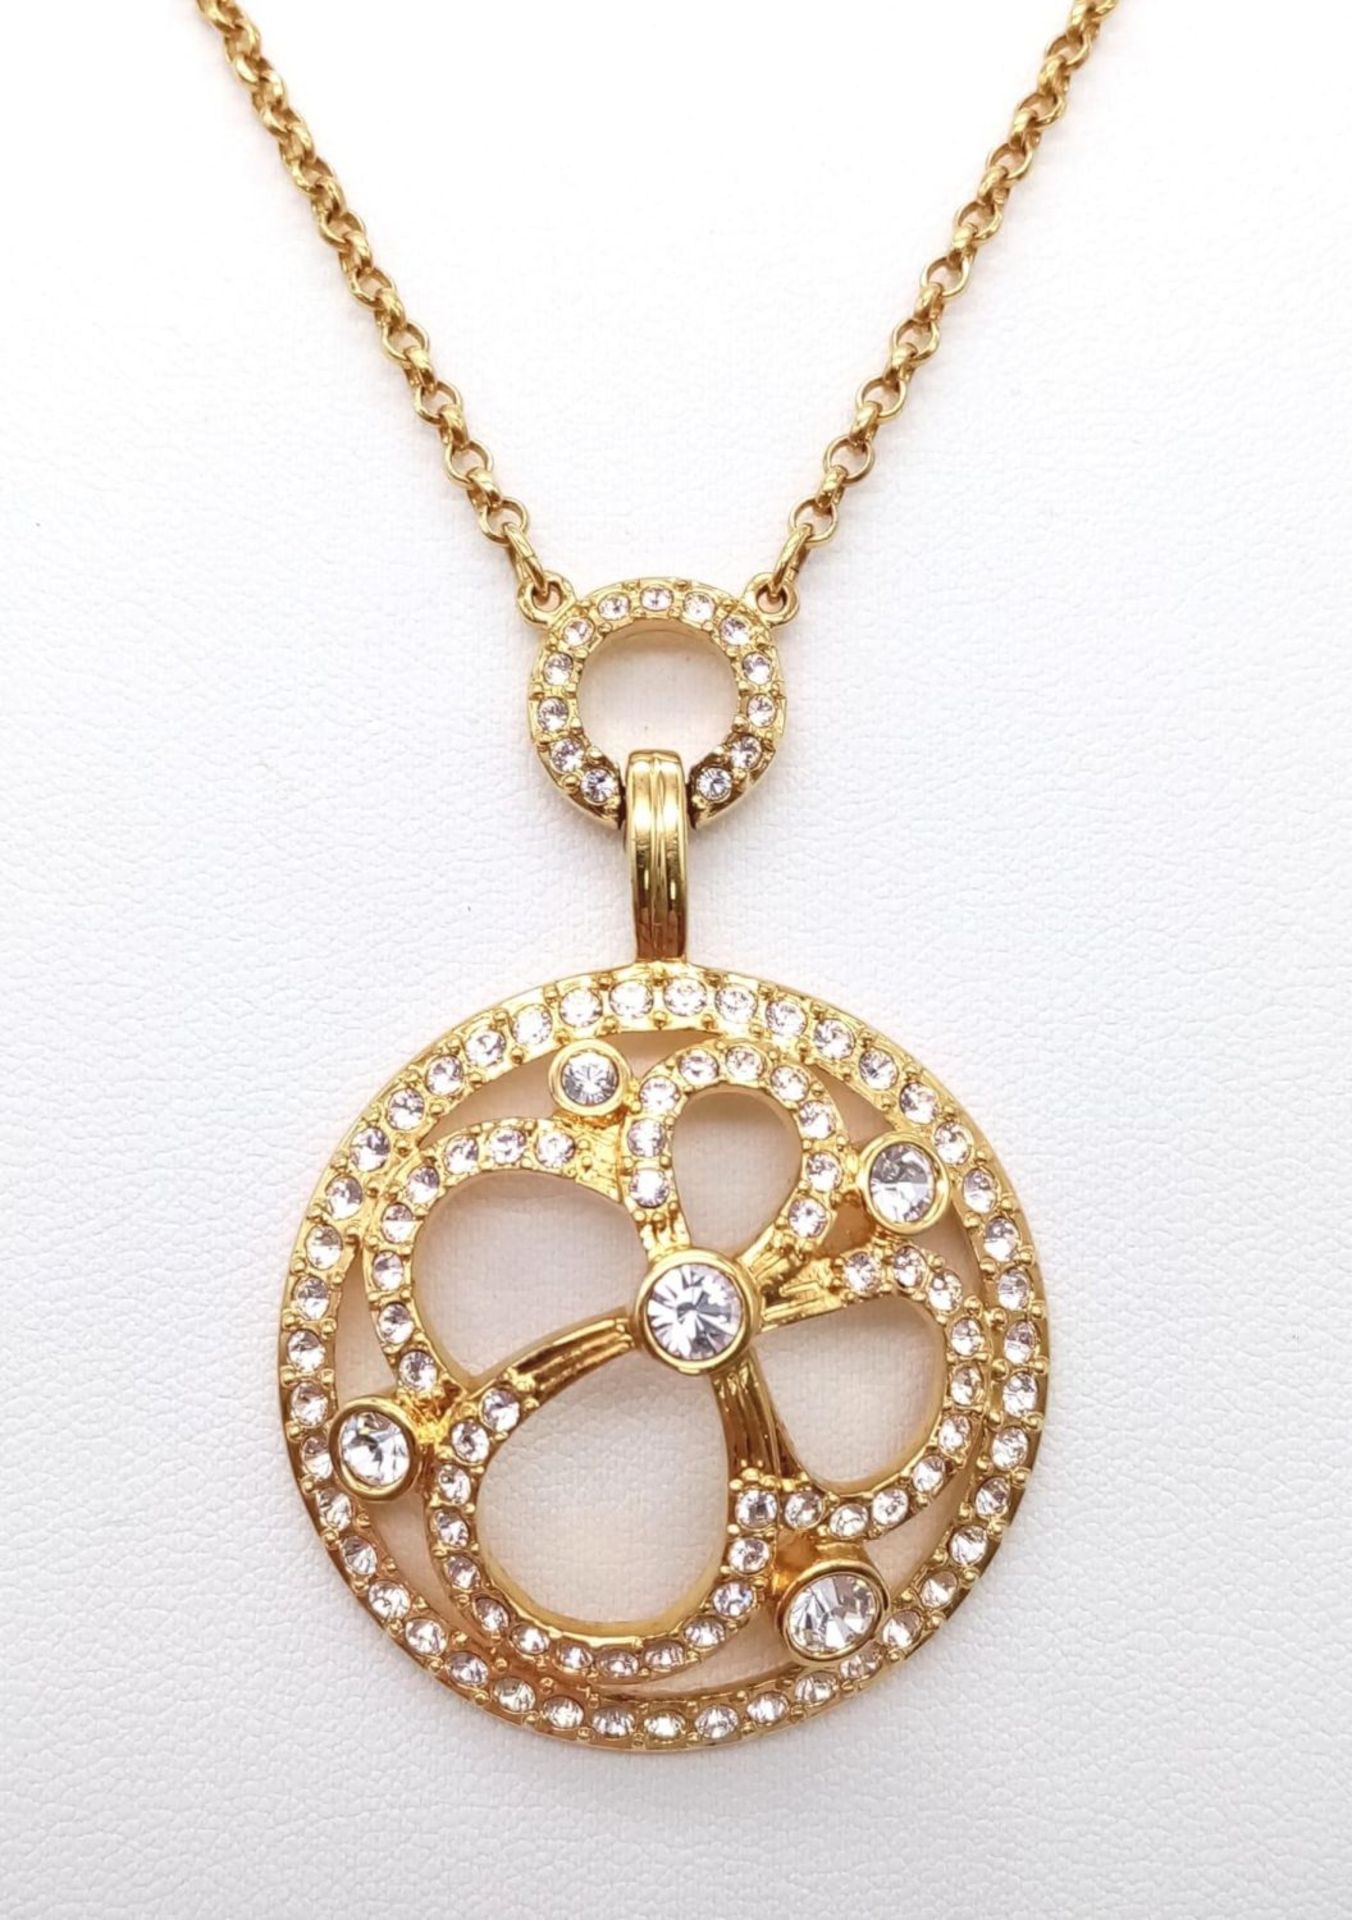 A Swarovski Gilded Necklace and Pendant with White Stone Decoration. - Image 2 of 8